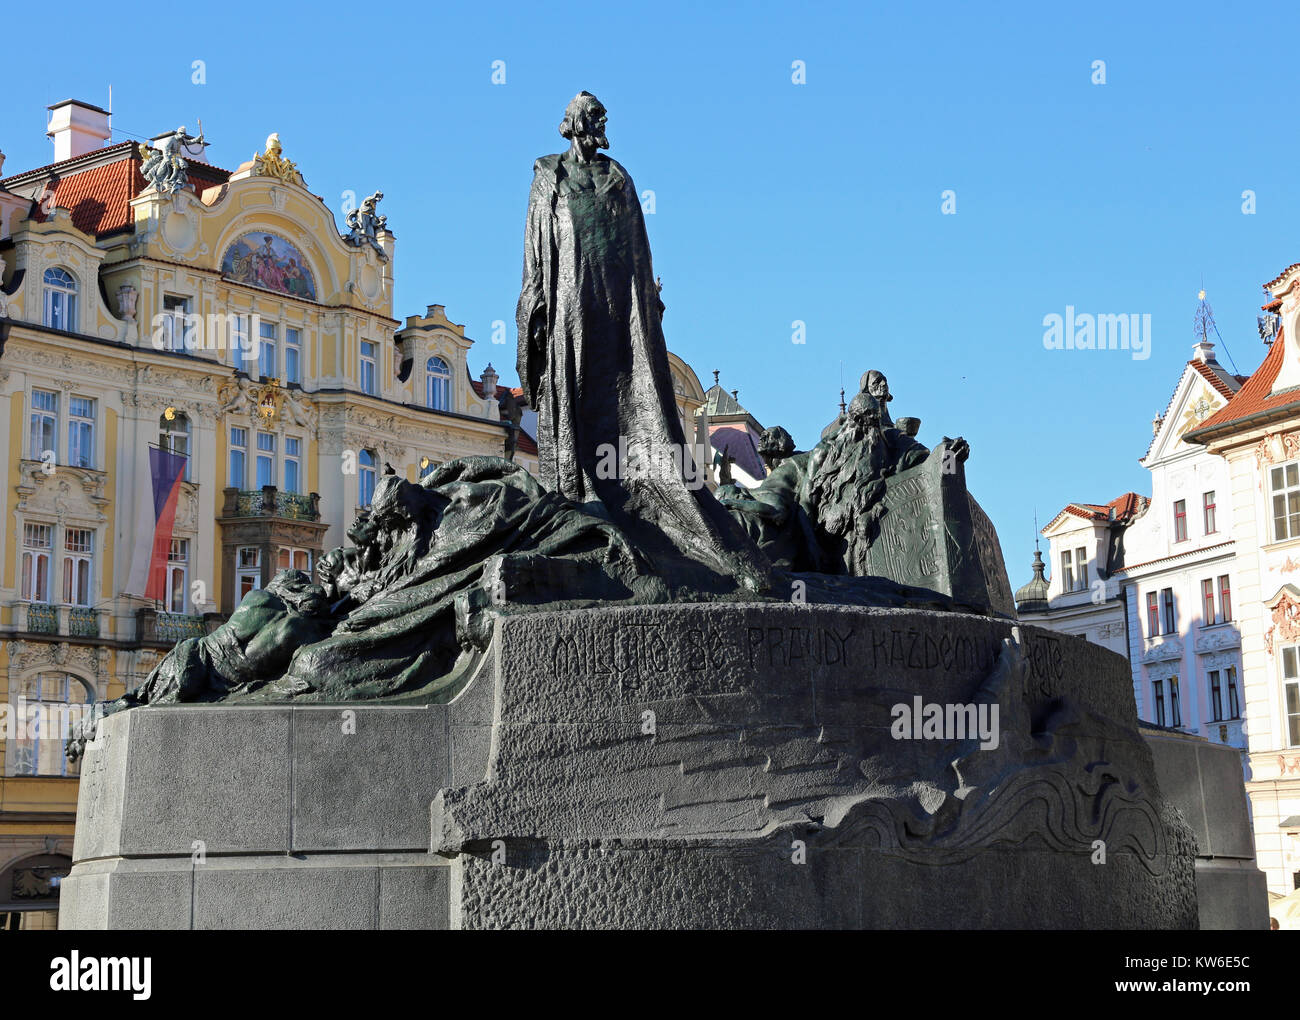 Prague, Czech Republic - August 23, 2016: Memorial of Jan Hus at Old Town Square built in 1915. Jan Hus was a czech linguist, religion writer, philoso Stock Photo